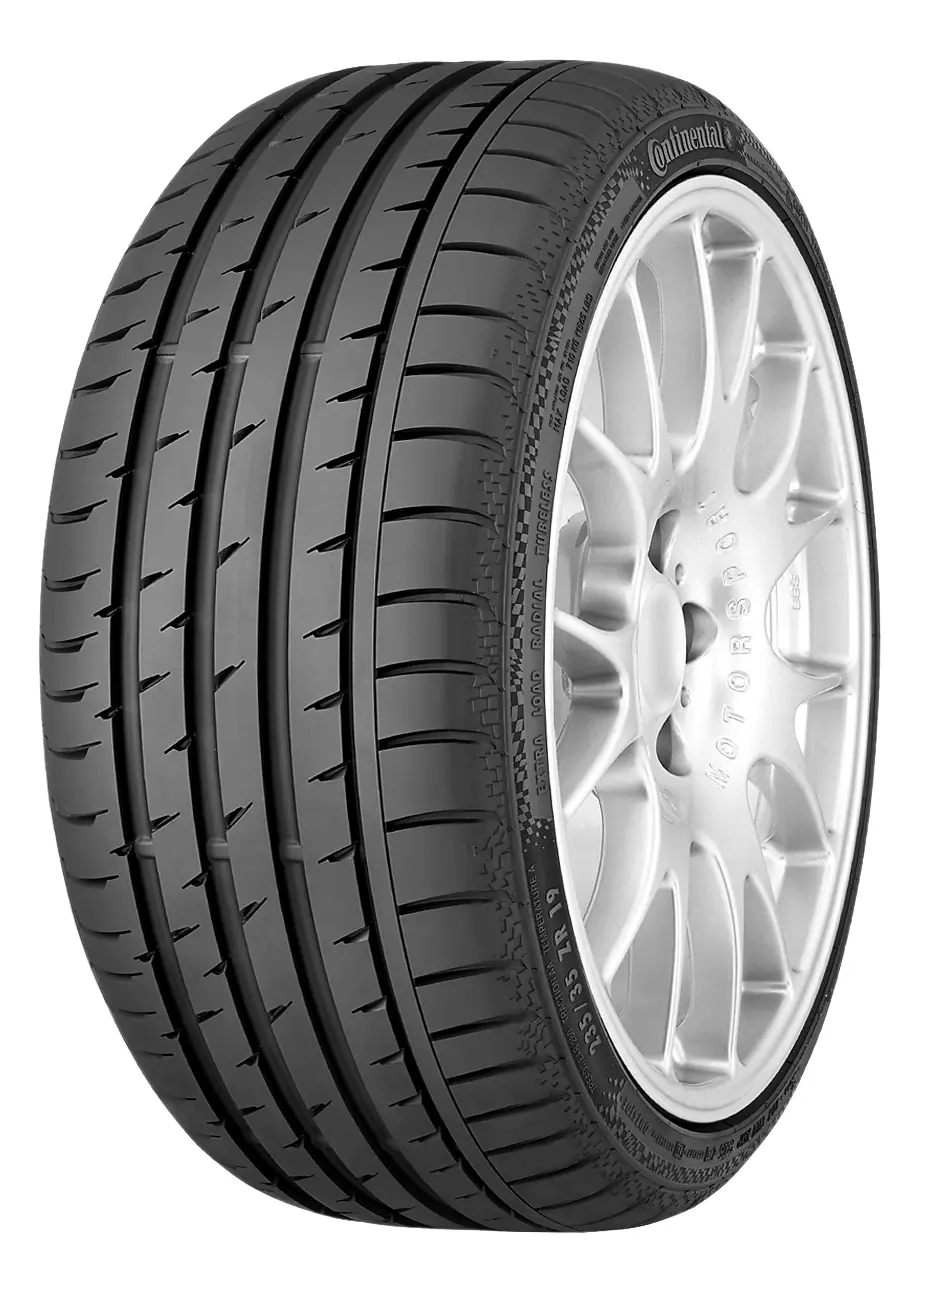 Buy Continental ContiSportContact 3 Tyres at Halfords UK